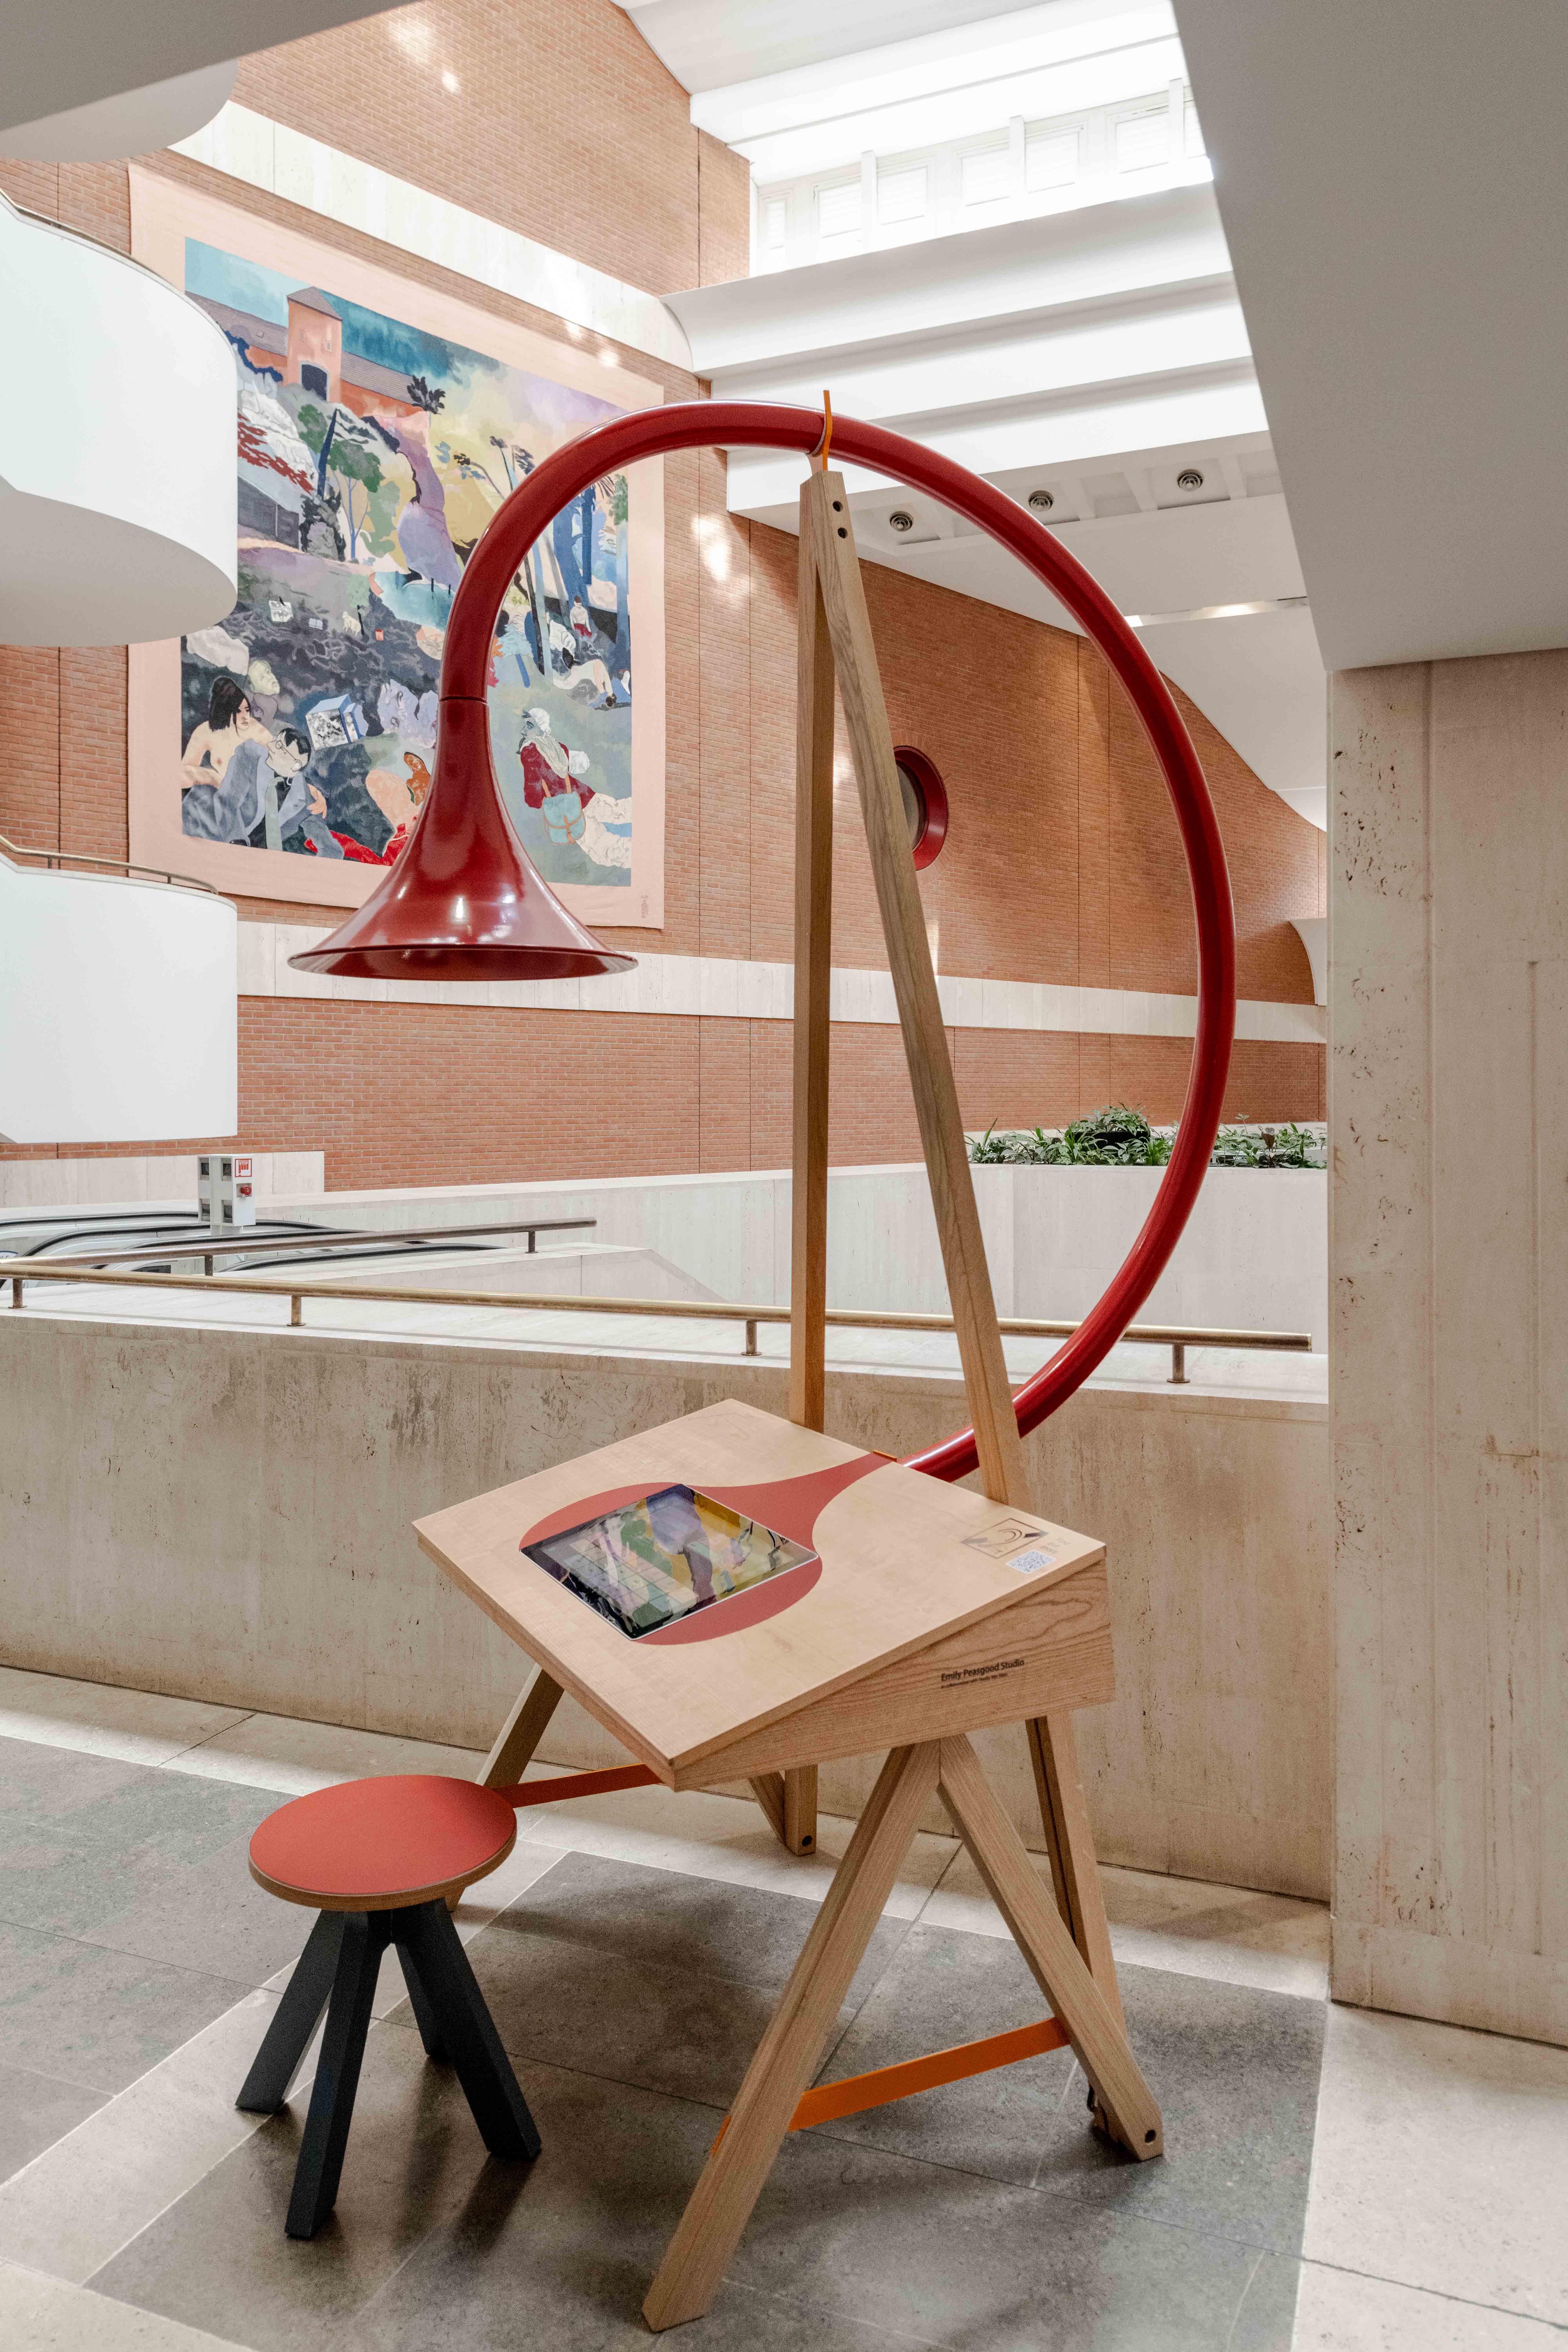 Image of Emily Peasgood's Listening Desk in The British Library. A desk with a large curved horn in the shape of an ear.